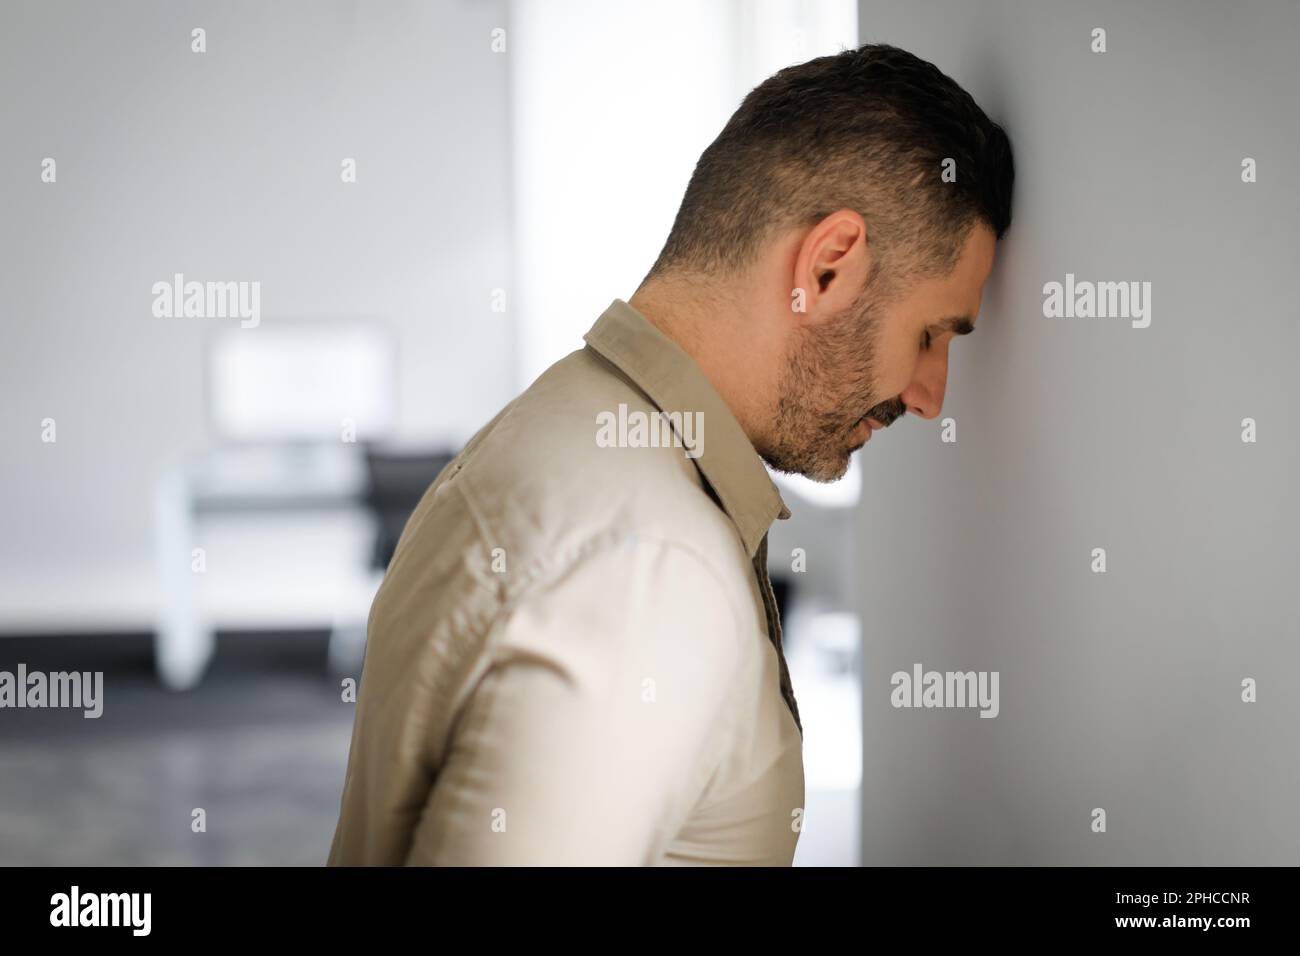 Upset middle aged businessman banging his head against wall in despair looking stressed, having problems at work Stock Photo